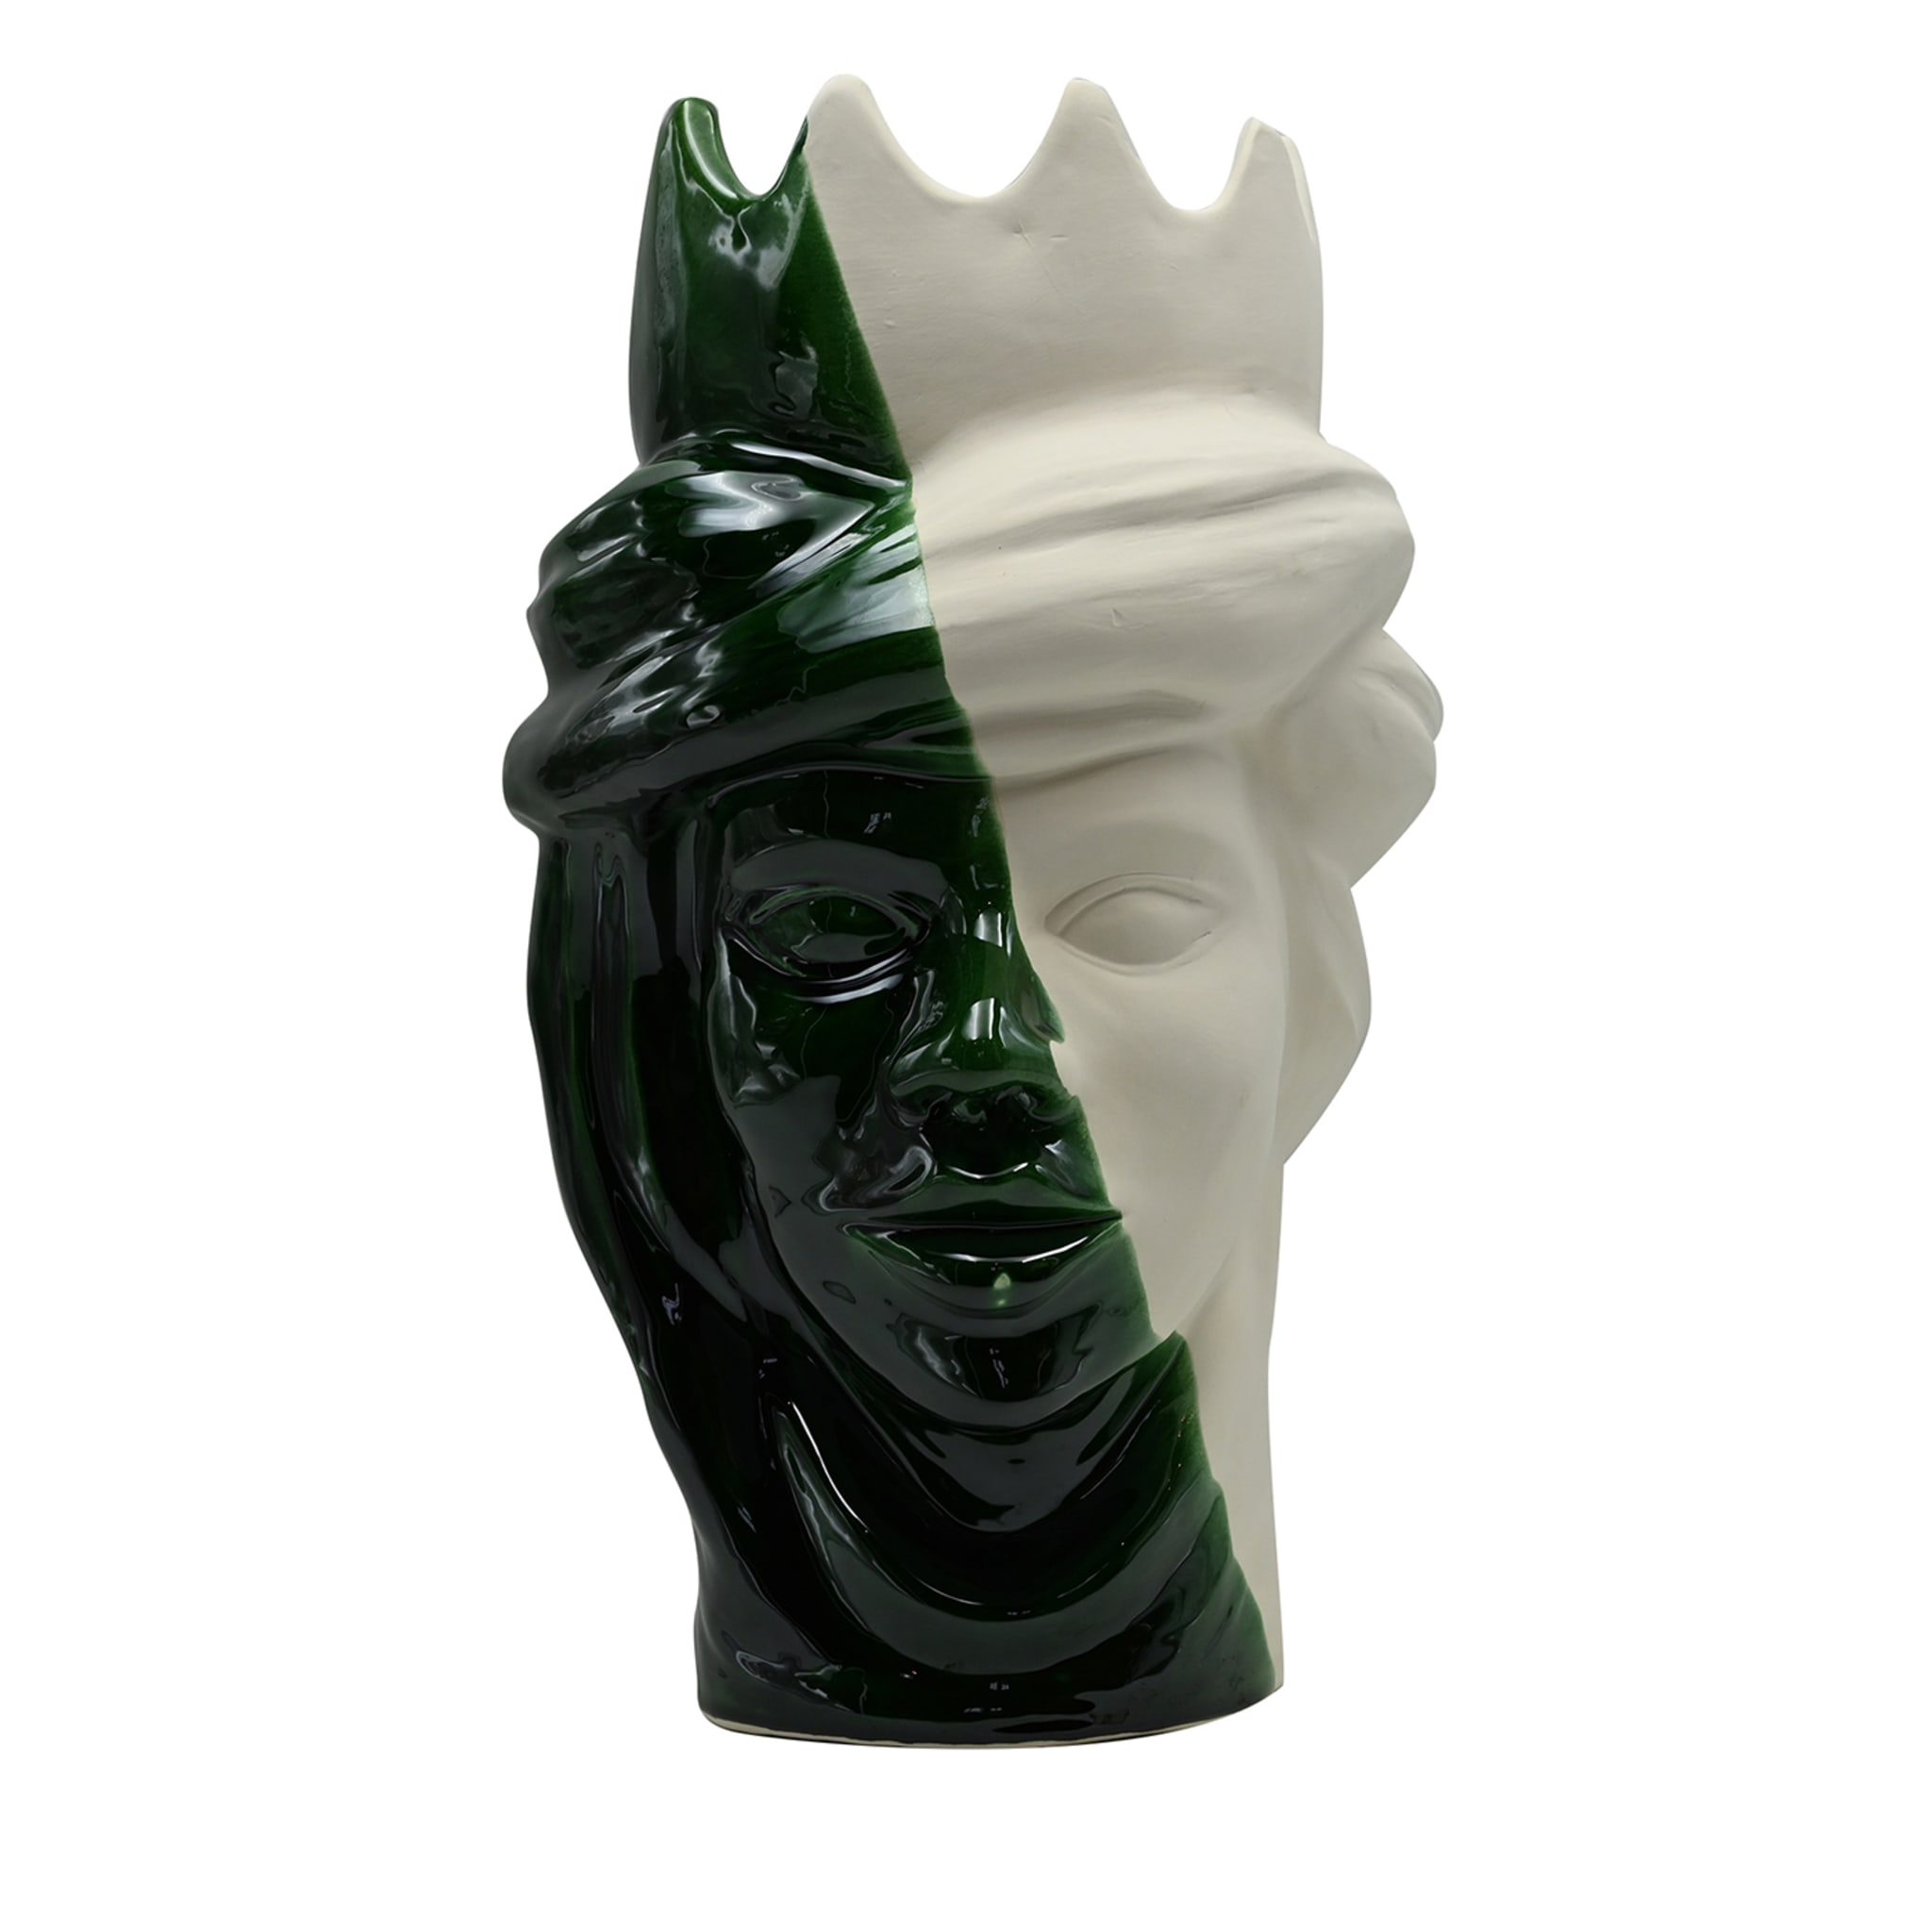 Italian Handcrafted Green and White Moor's Head Sculpture